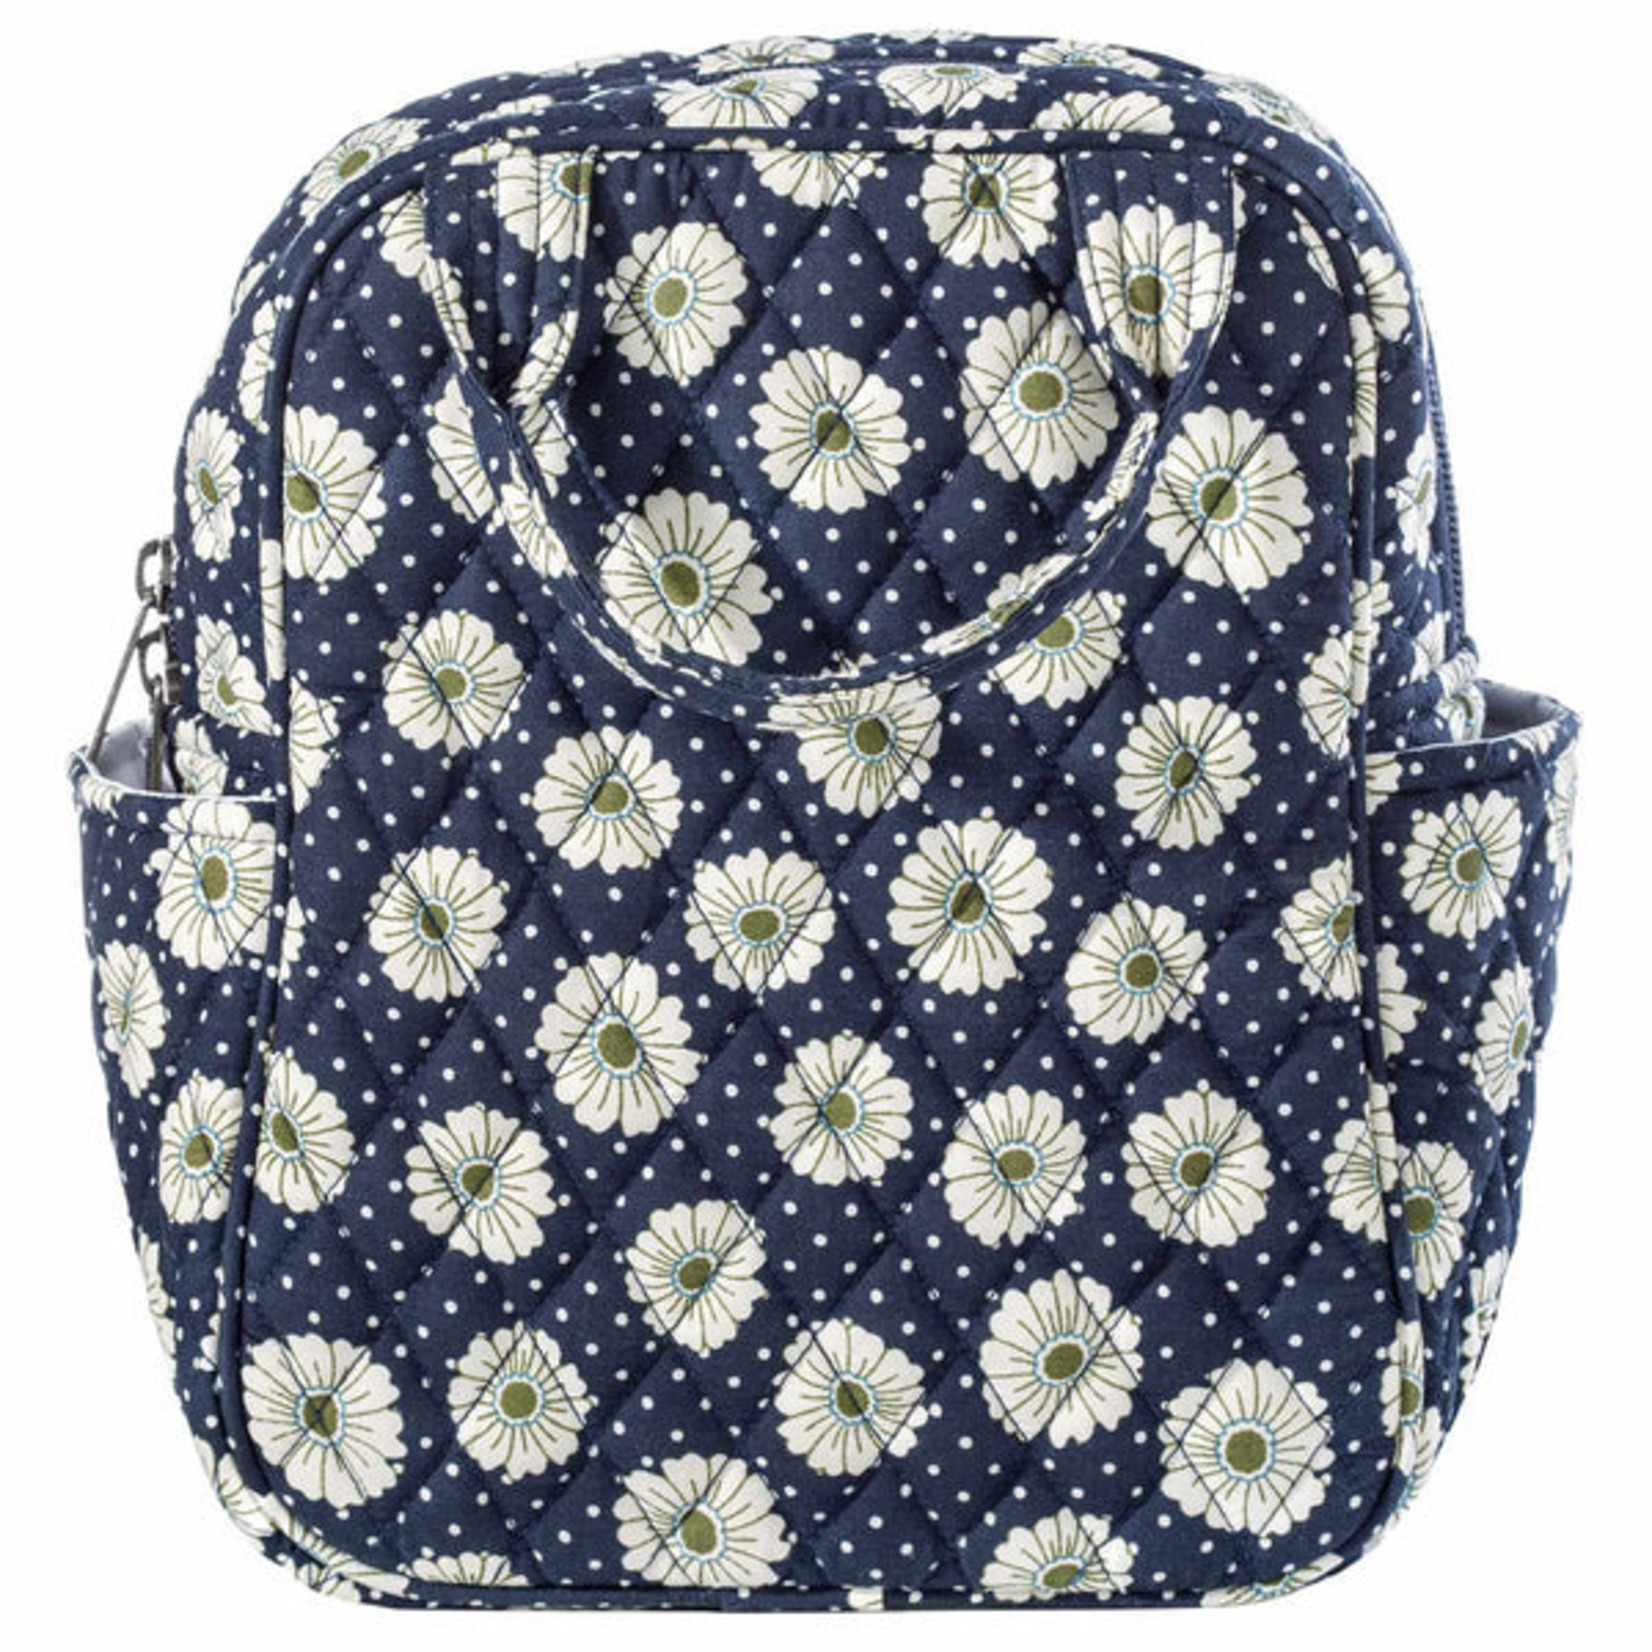 Bella Taylor Dotted Daisy Navy - Lunch Tote